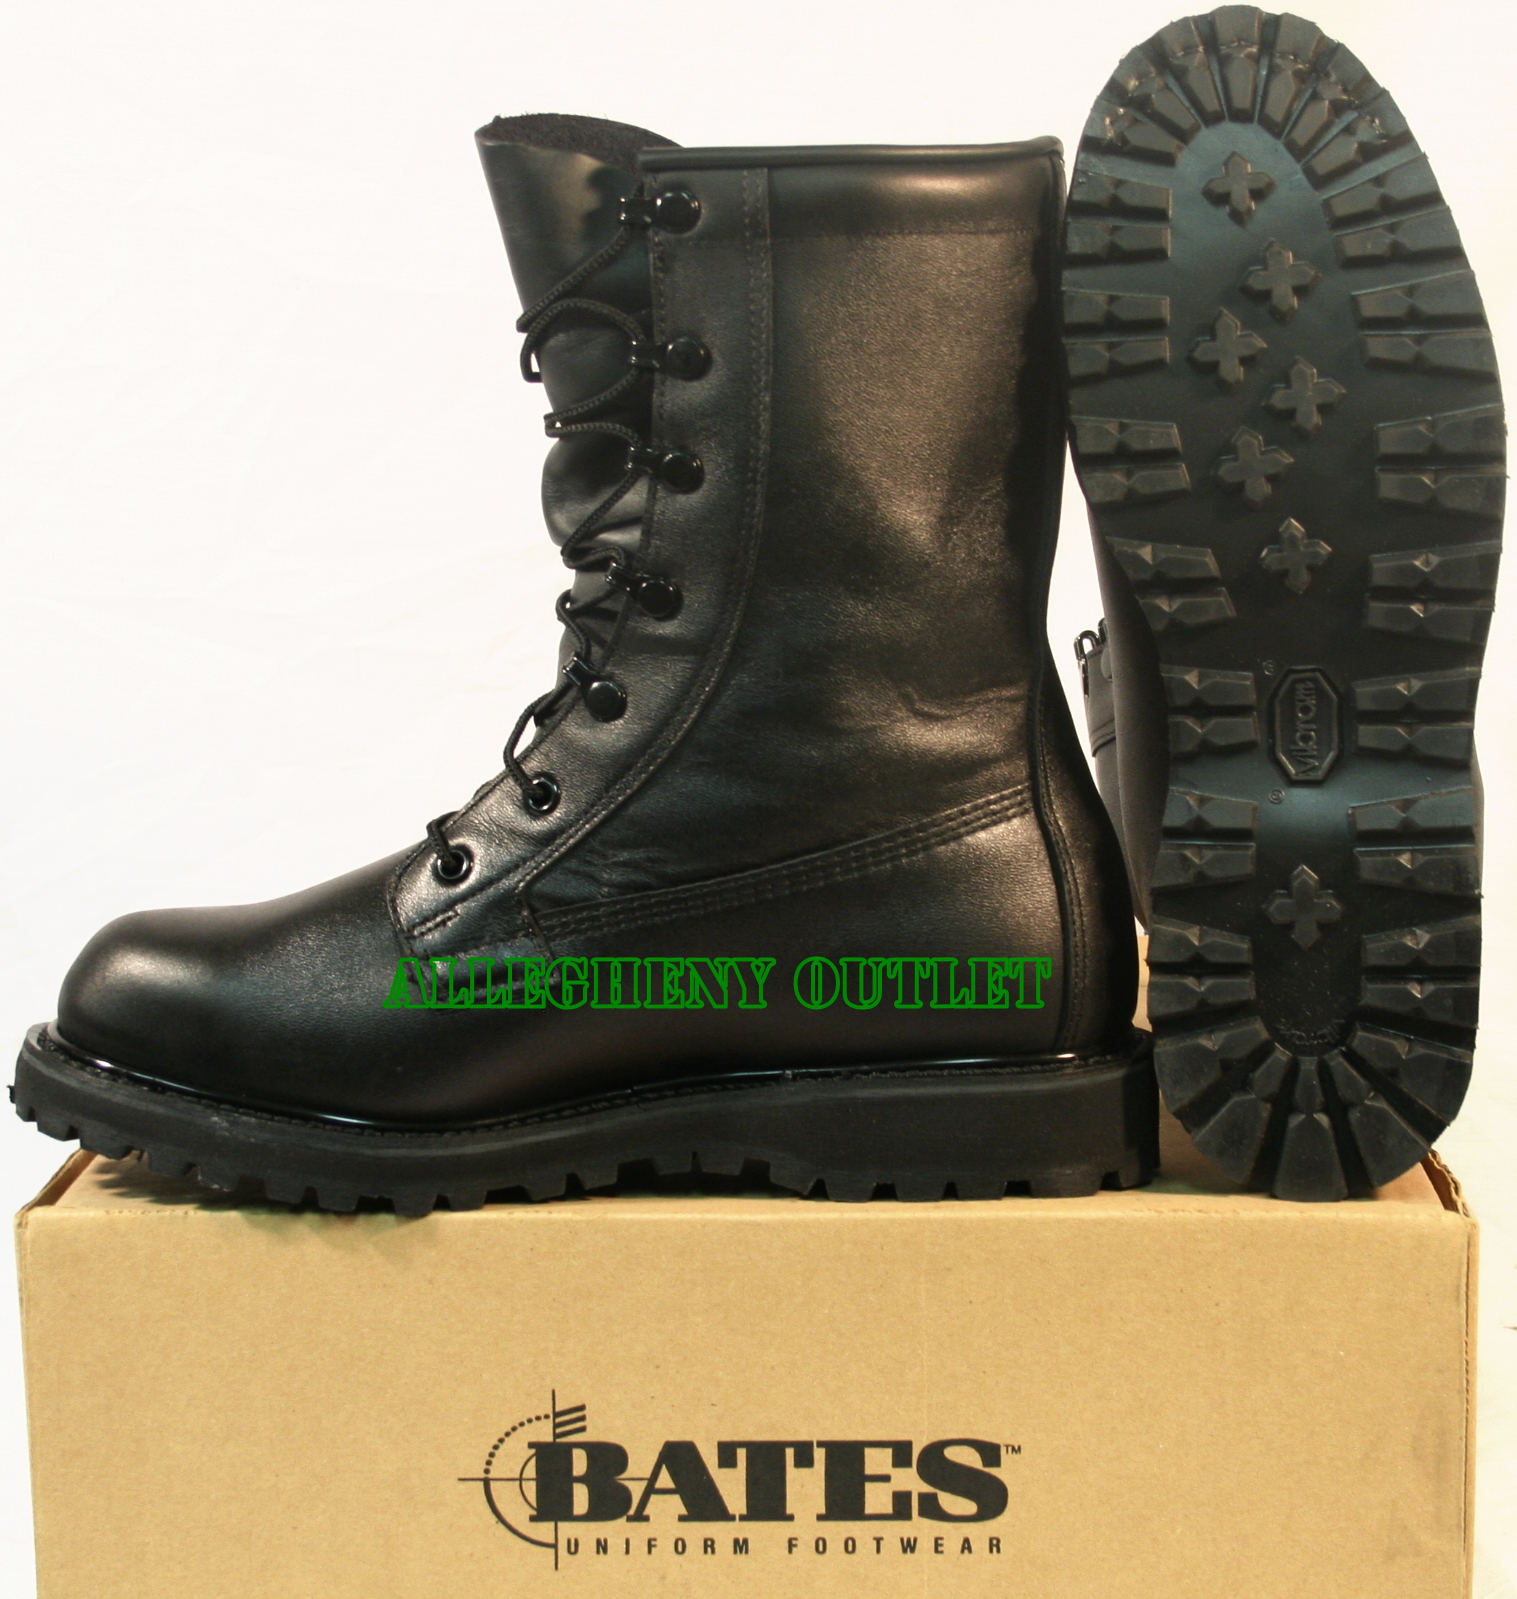 GORETEX ICW FULL LEATHER WATERPROOF Military Combat Boots Cold ...